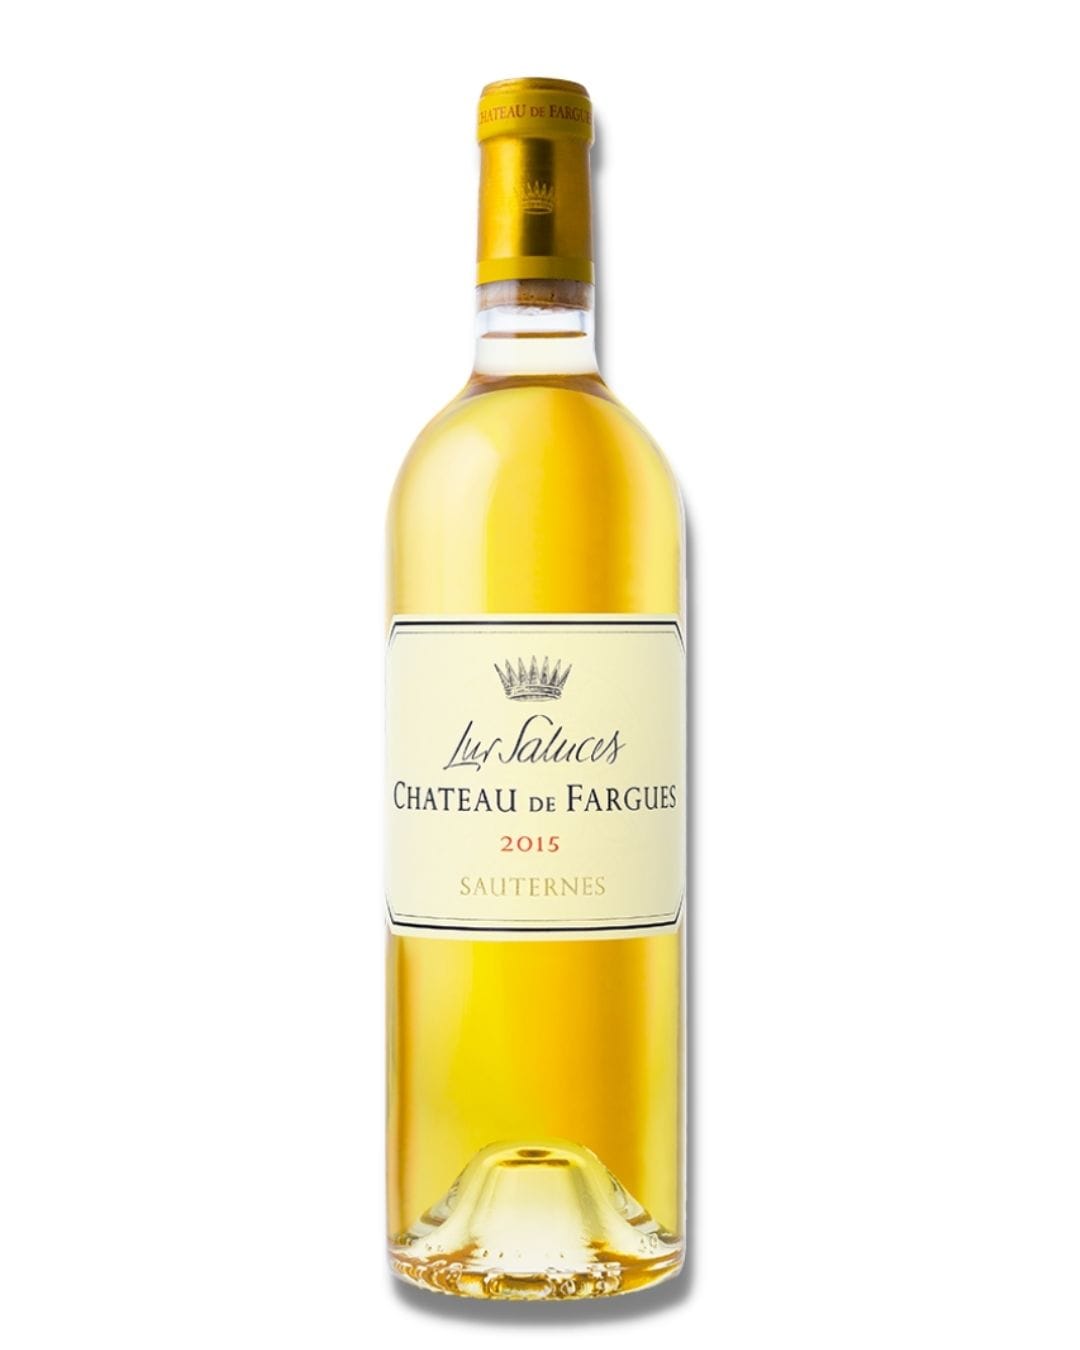 Shop Chateau de Fargues Chateau de Fargues 2015 online at PENTICTON artisanal French wine store in Hong Kong. Discover other French wines, promotions, workshops and featured offers at pentictonpacific.com 